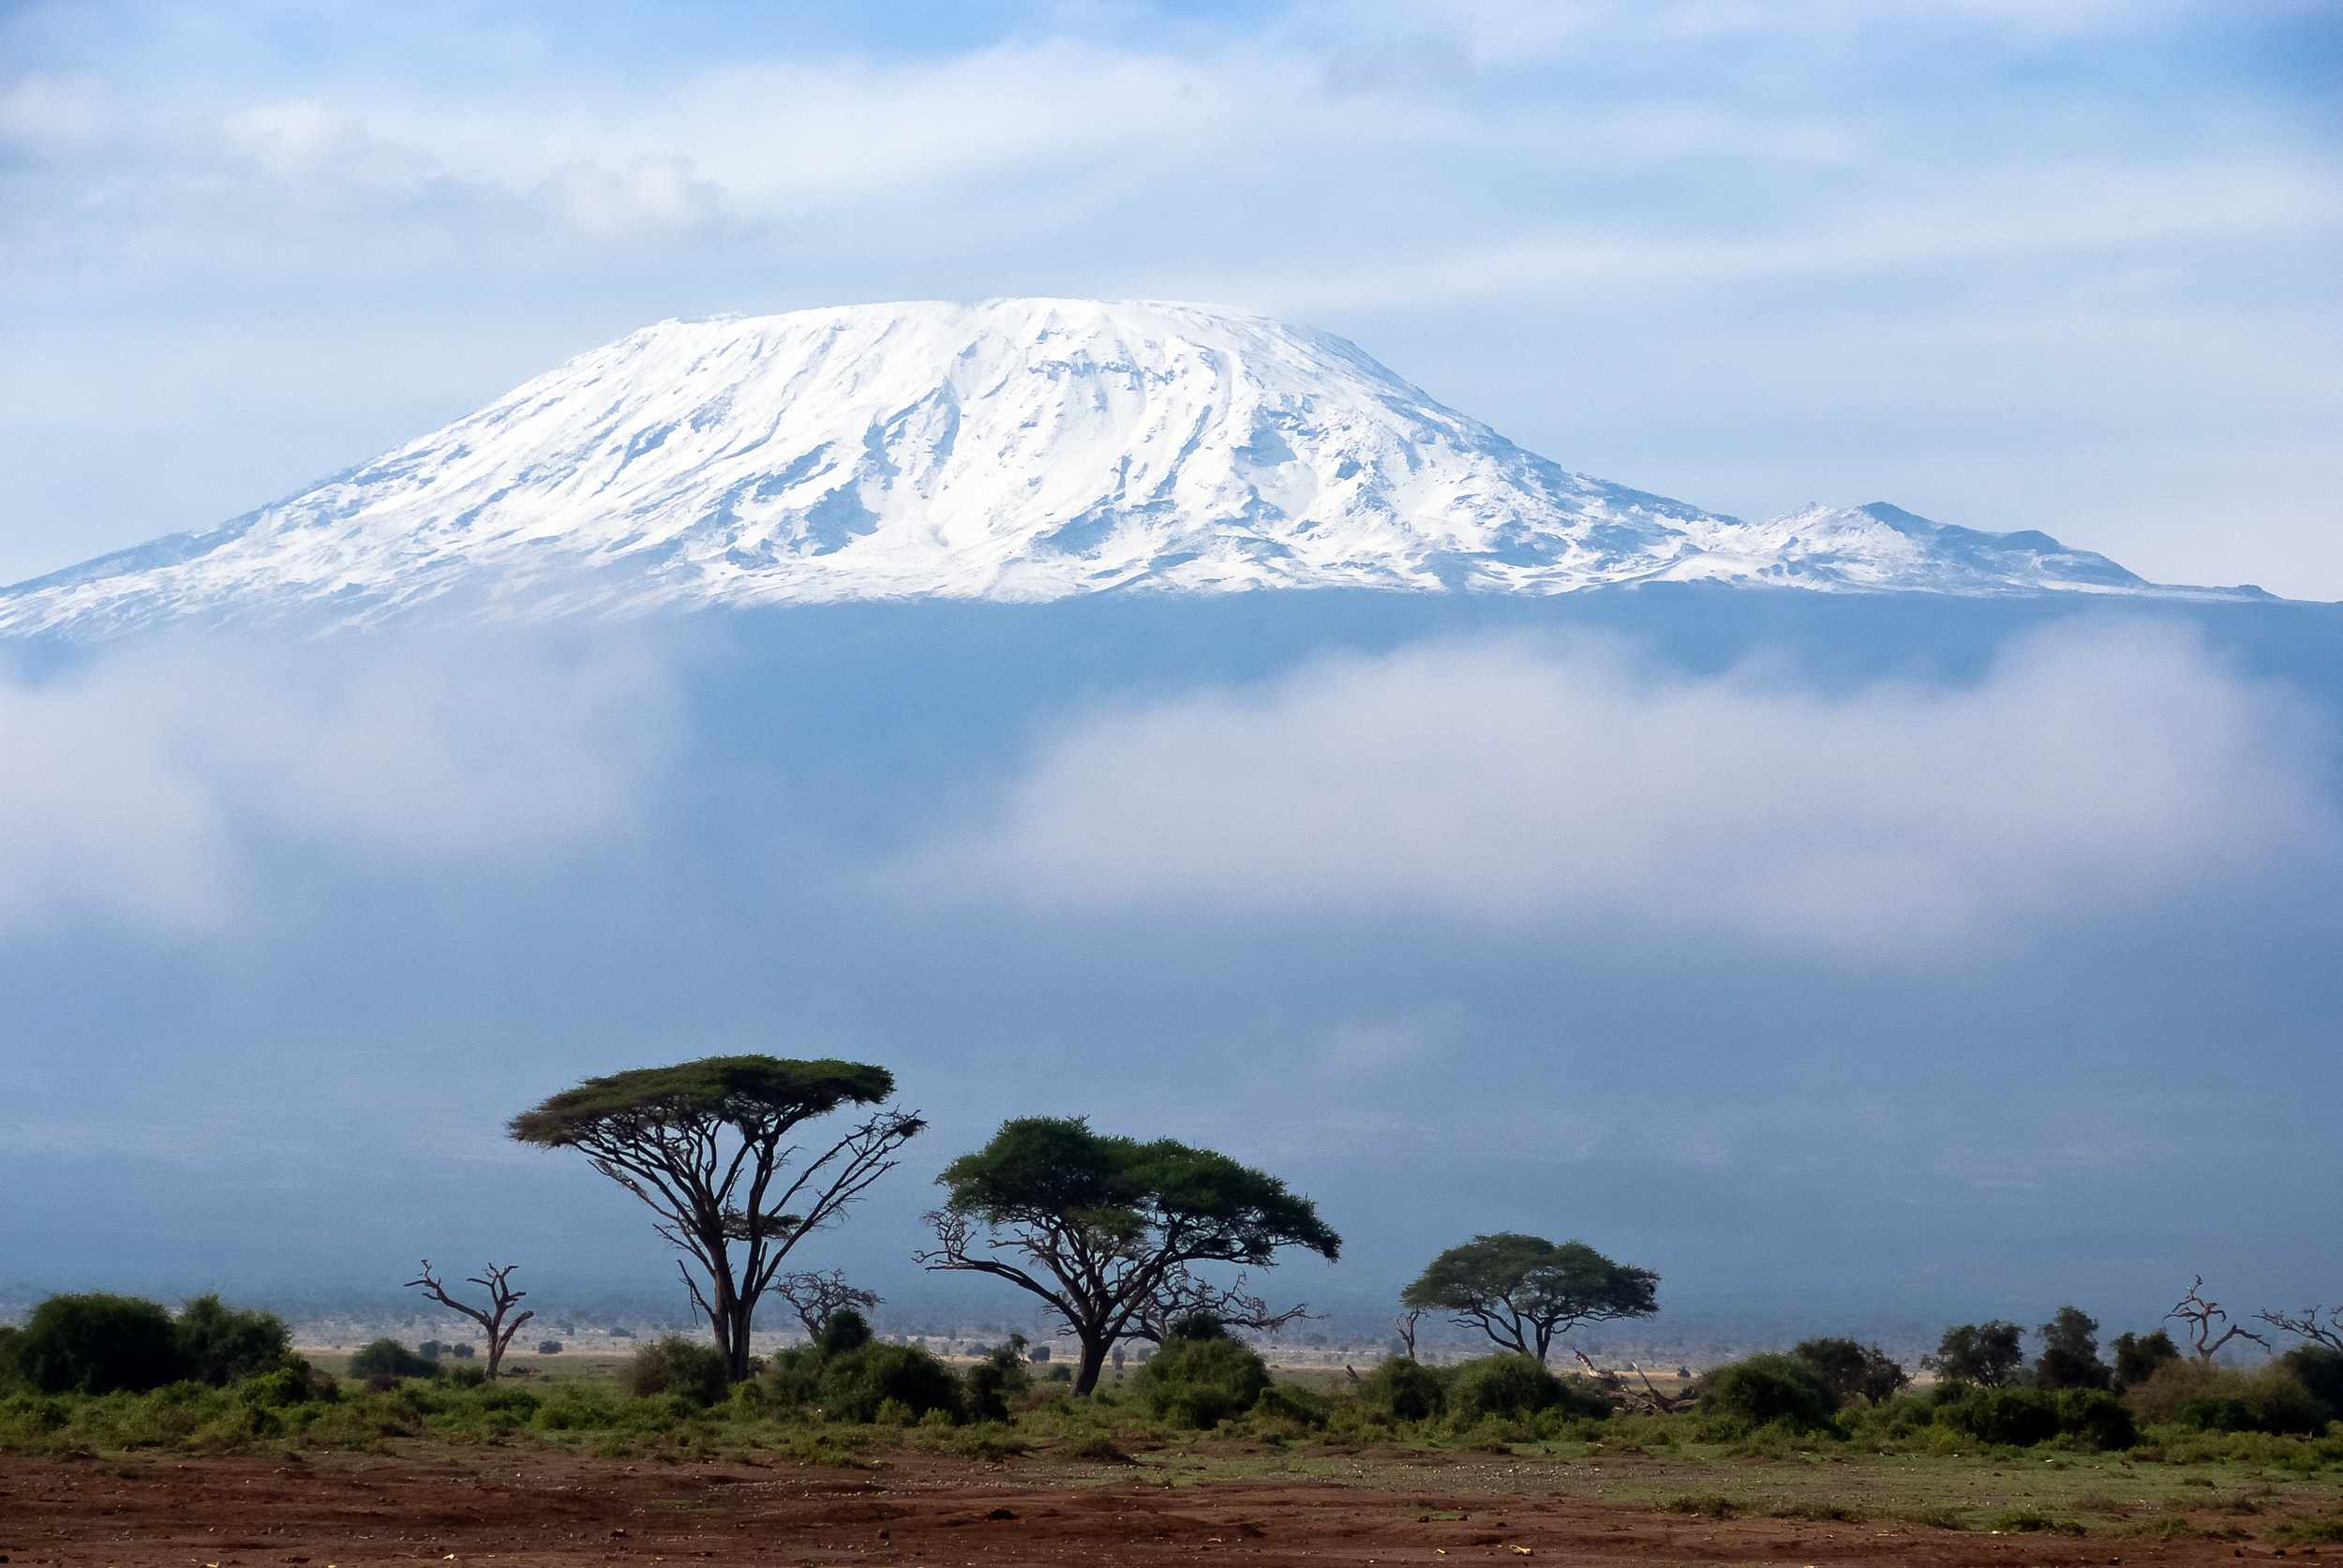 long distance photo of Mt. Kilimanjaro in Africa